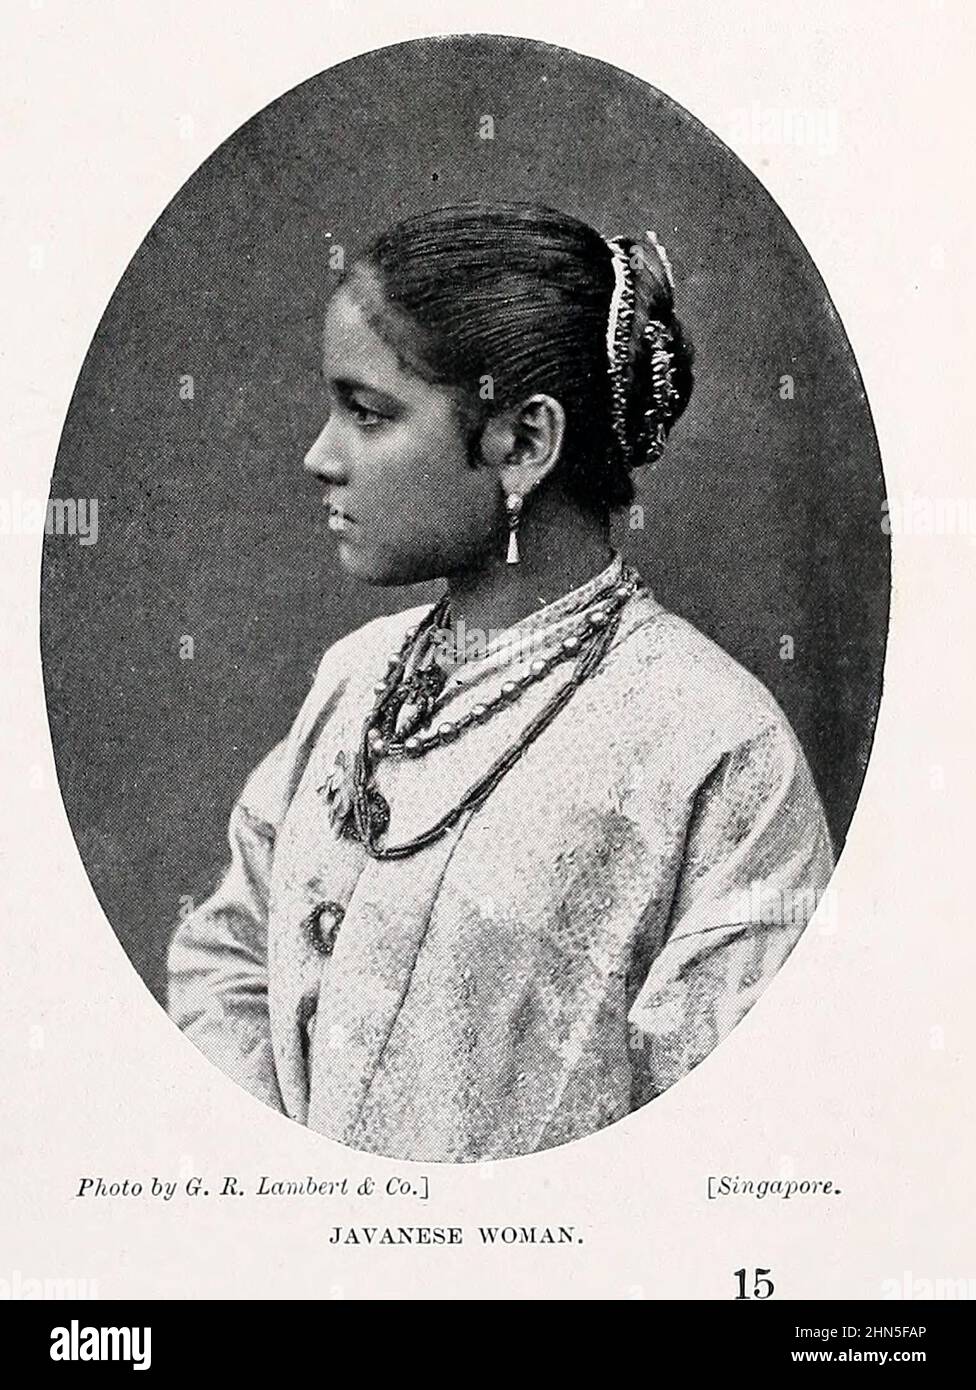 Javanese woman from The living races of mankind : a popular illustrated account of the customs, habits, pursuits, feasts & ceremonies of the races of mankind throughout the world Volume 1 by Sir Harry Hamilton Johnston, Henry Neville Hutchinson, Richard Lydekker and Dr. A. H. Keane published London : Hutchinson & Co. 1902 Stock Photo